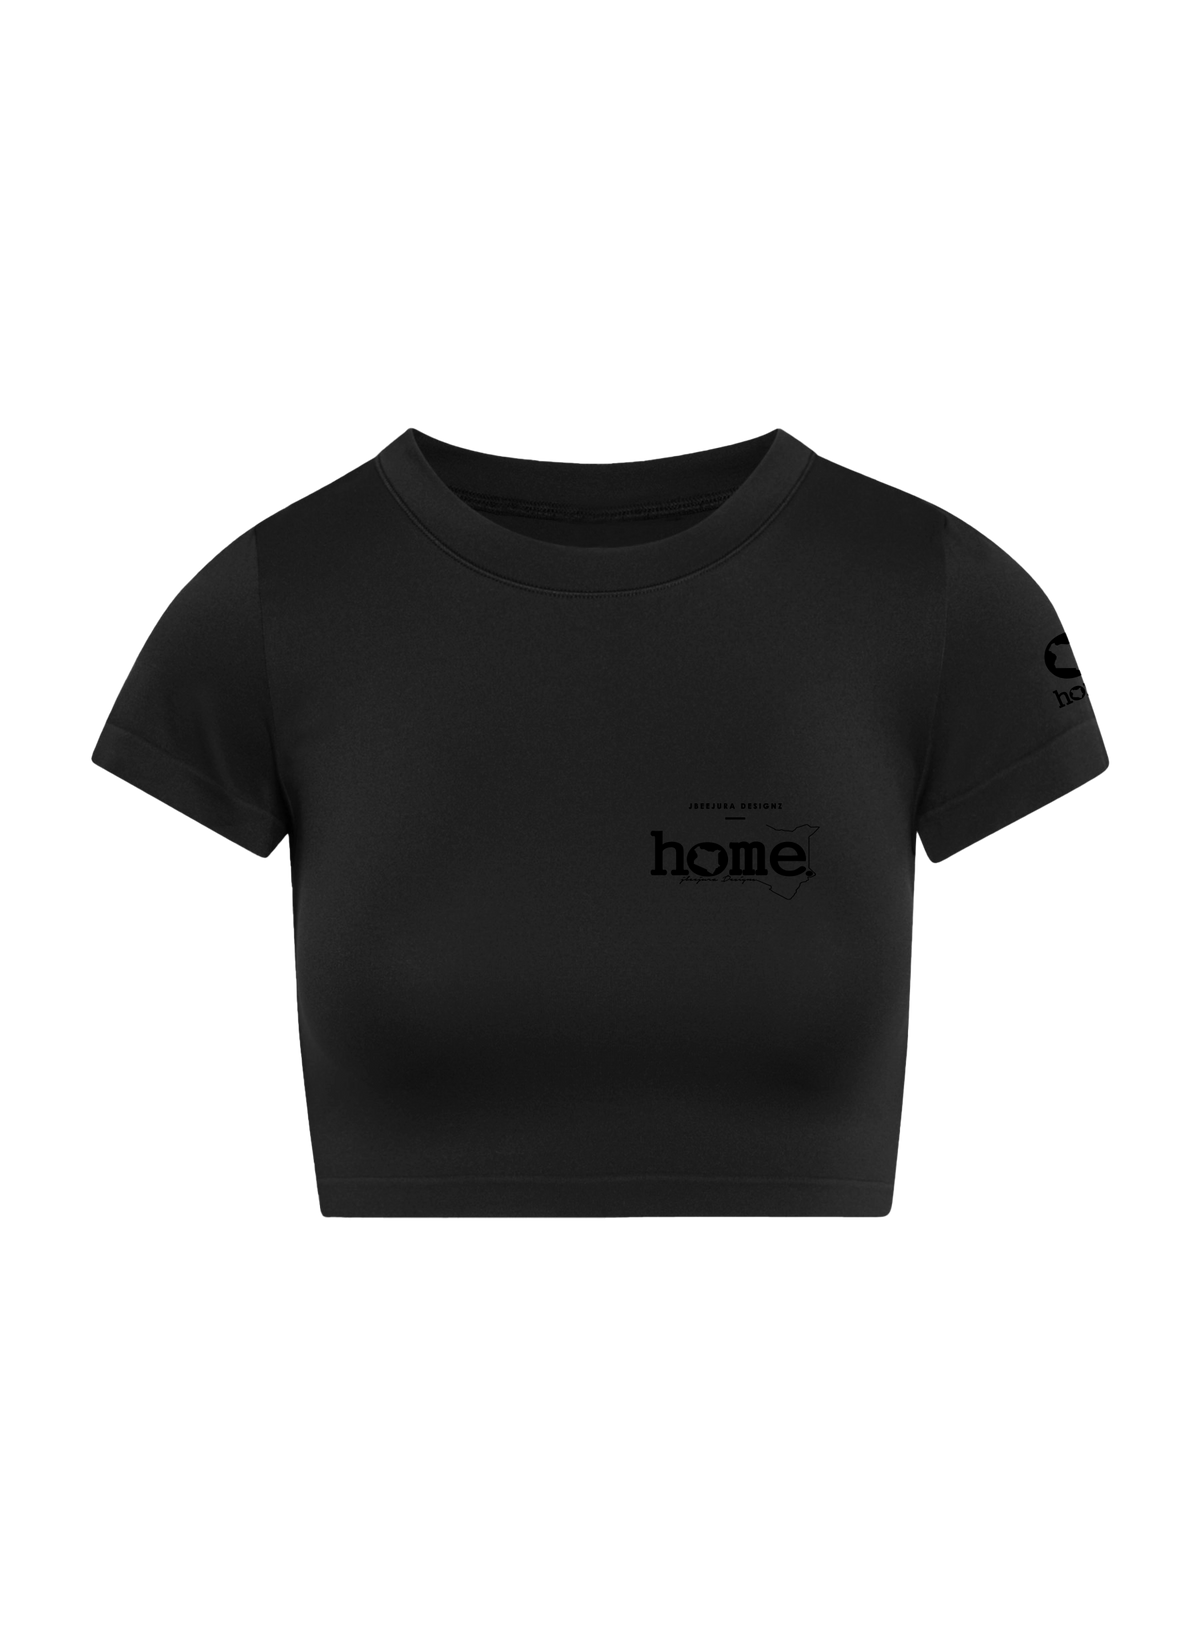 home_254 SHORT SLEEVED BLACK CROPPED ARIA TEE WITH A BLACK 3D WORDS PRINT